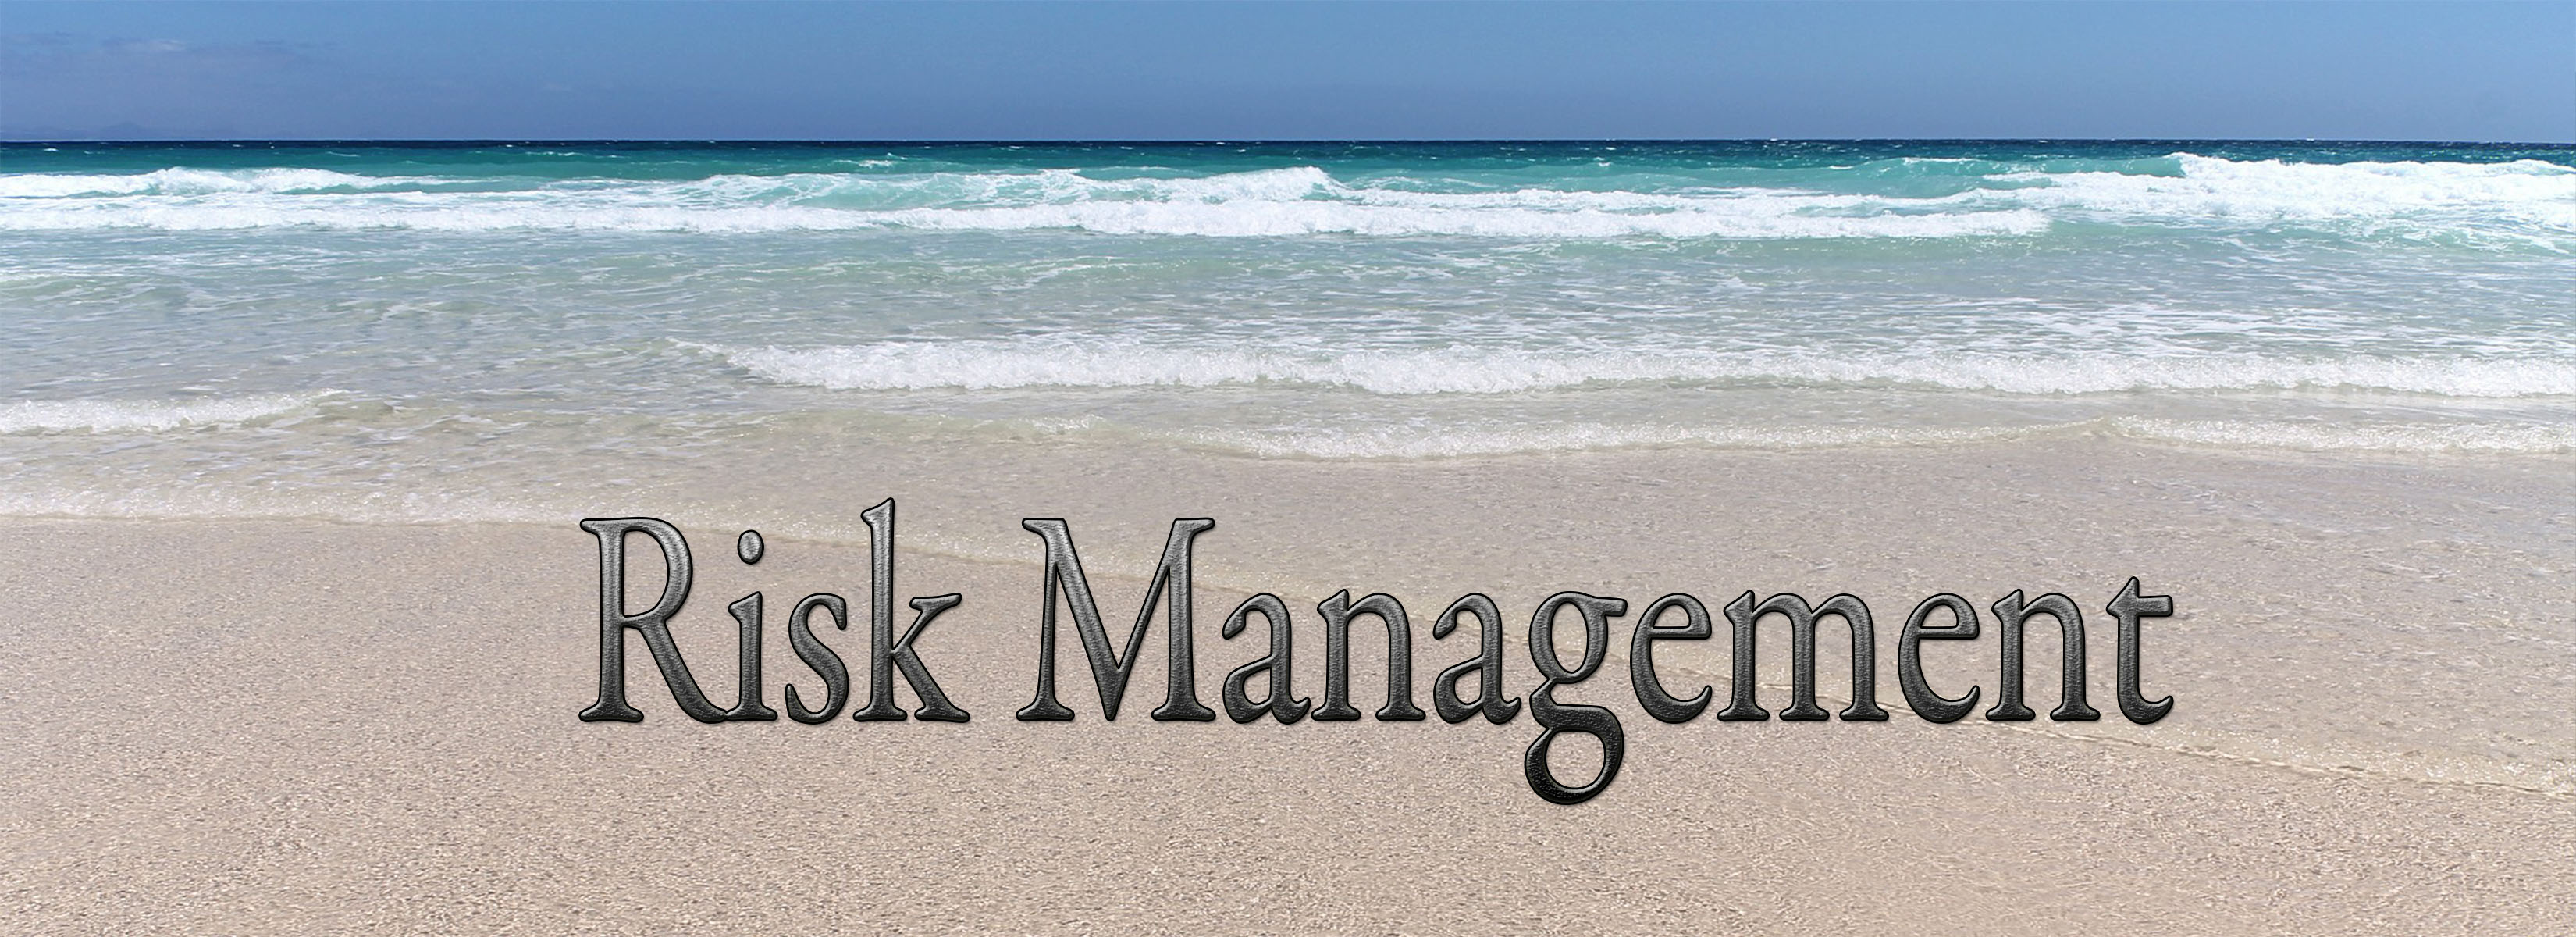 Using Risk Management To Make Your Business Stand Out